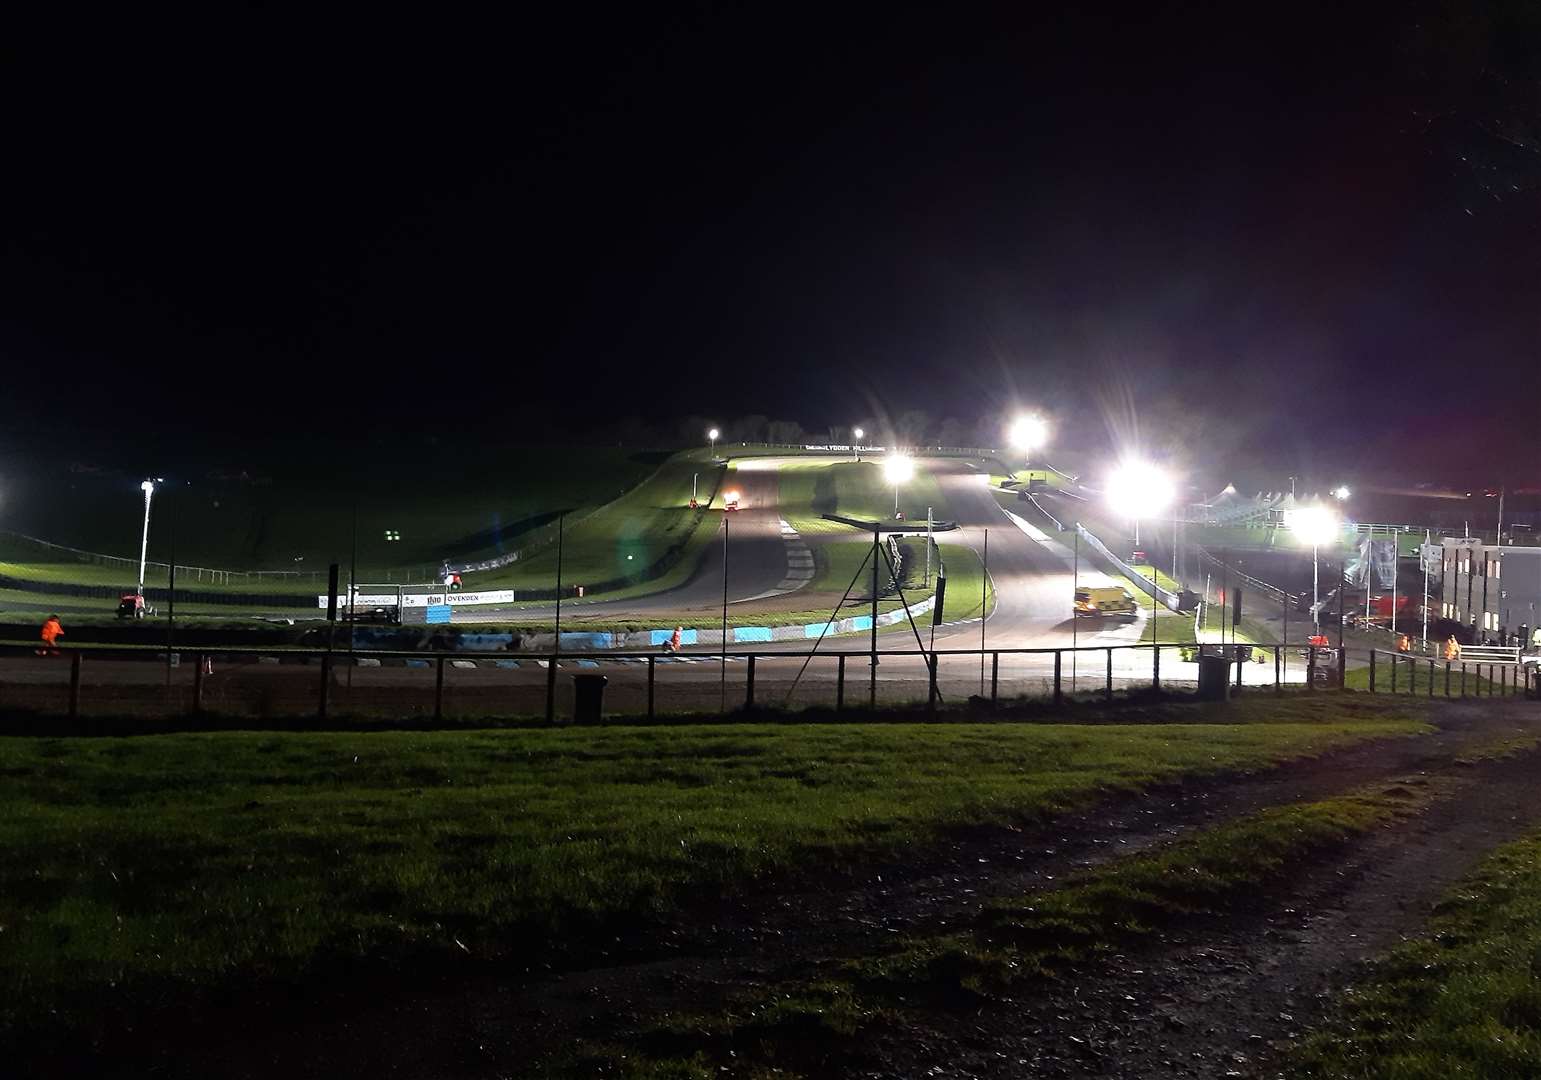 Floodlights allowed racing to continue until the 6pm curfew on Saturday evening